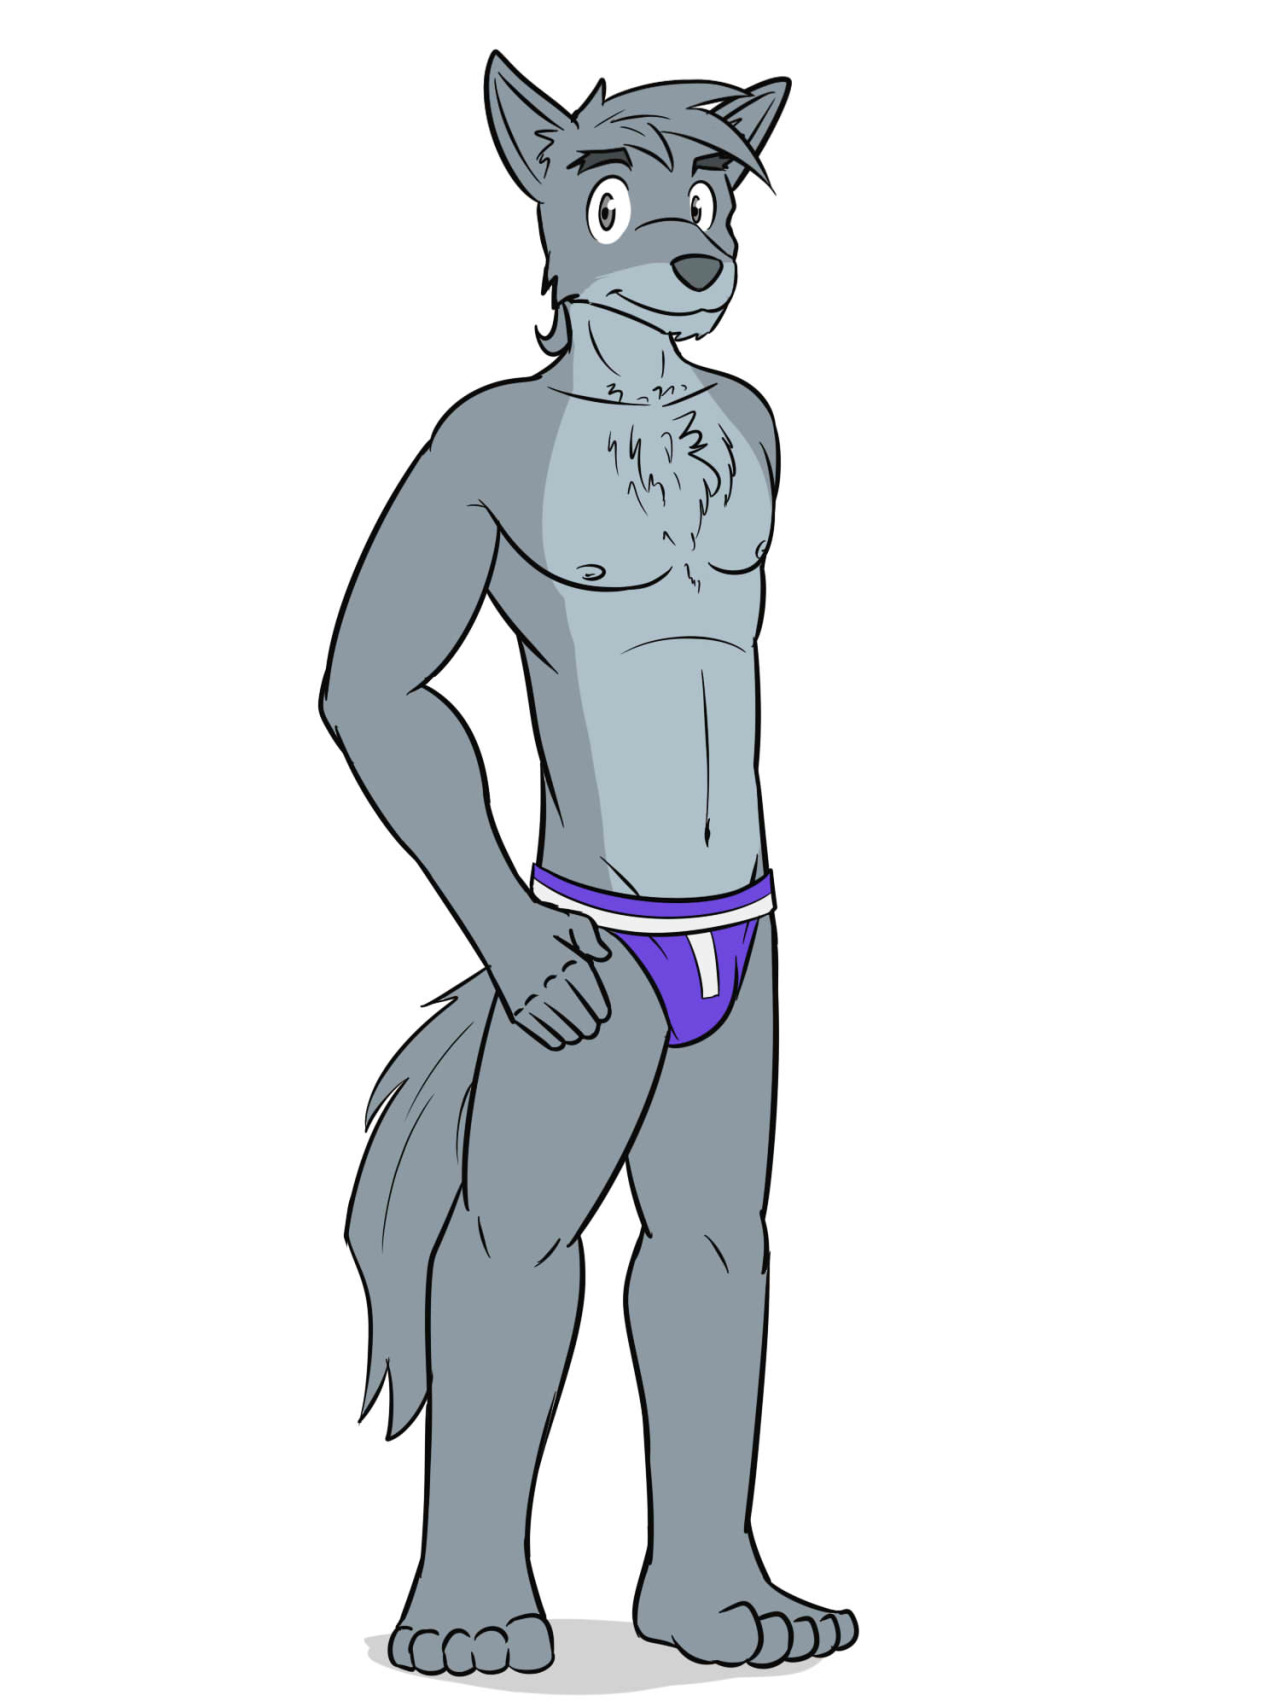 Request for SomeWolfwithaTablet, his wolf character.